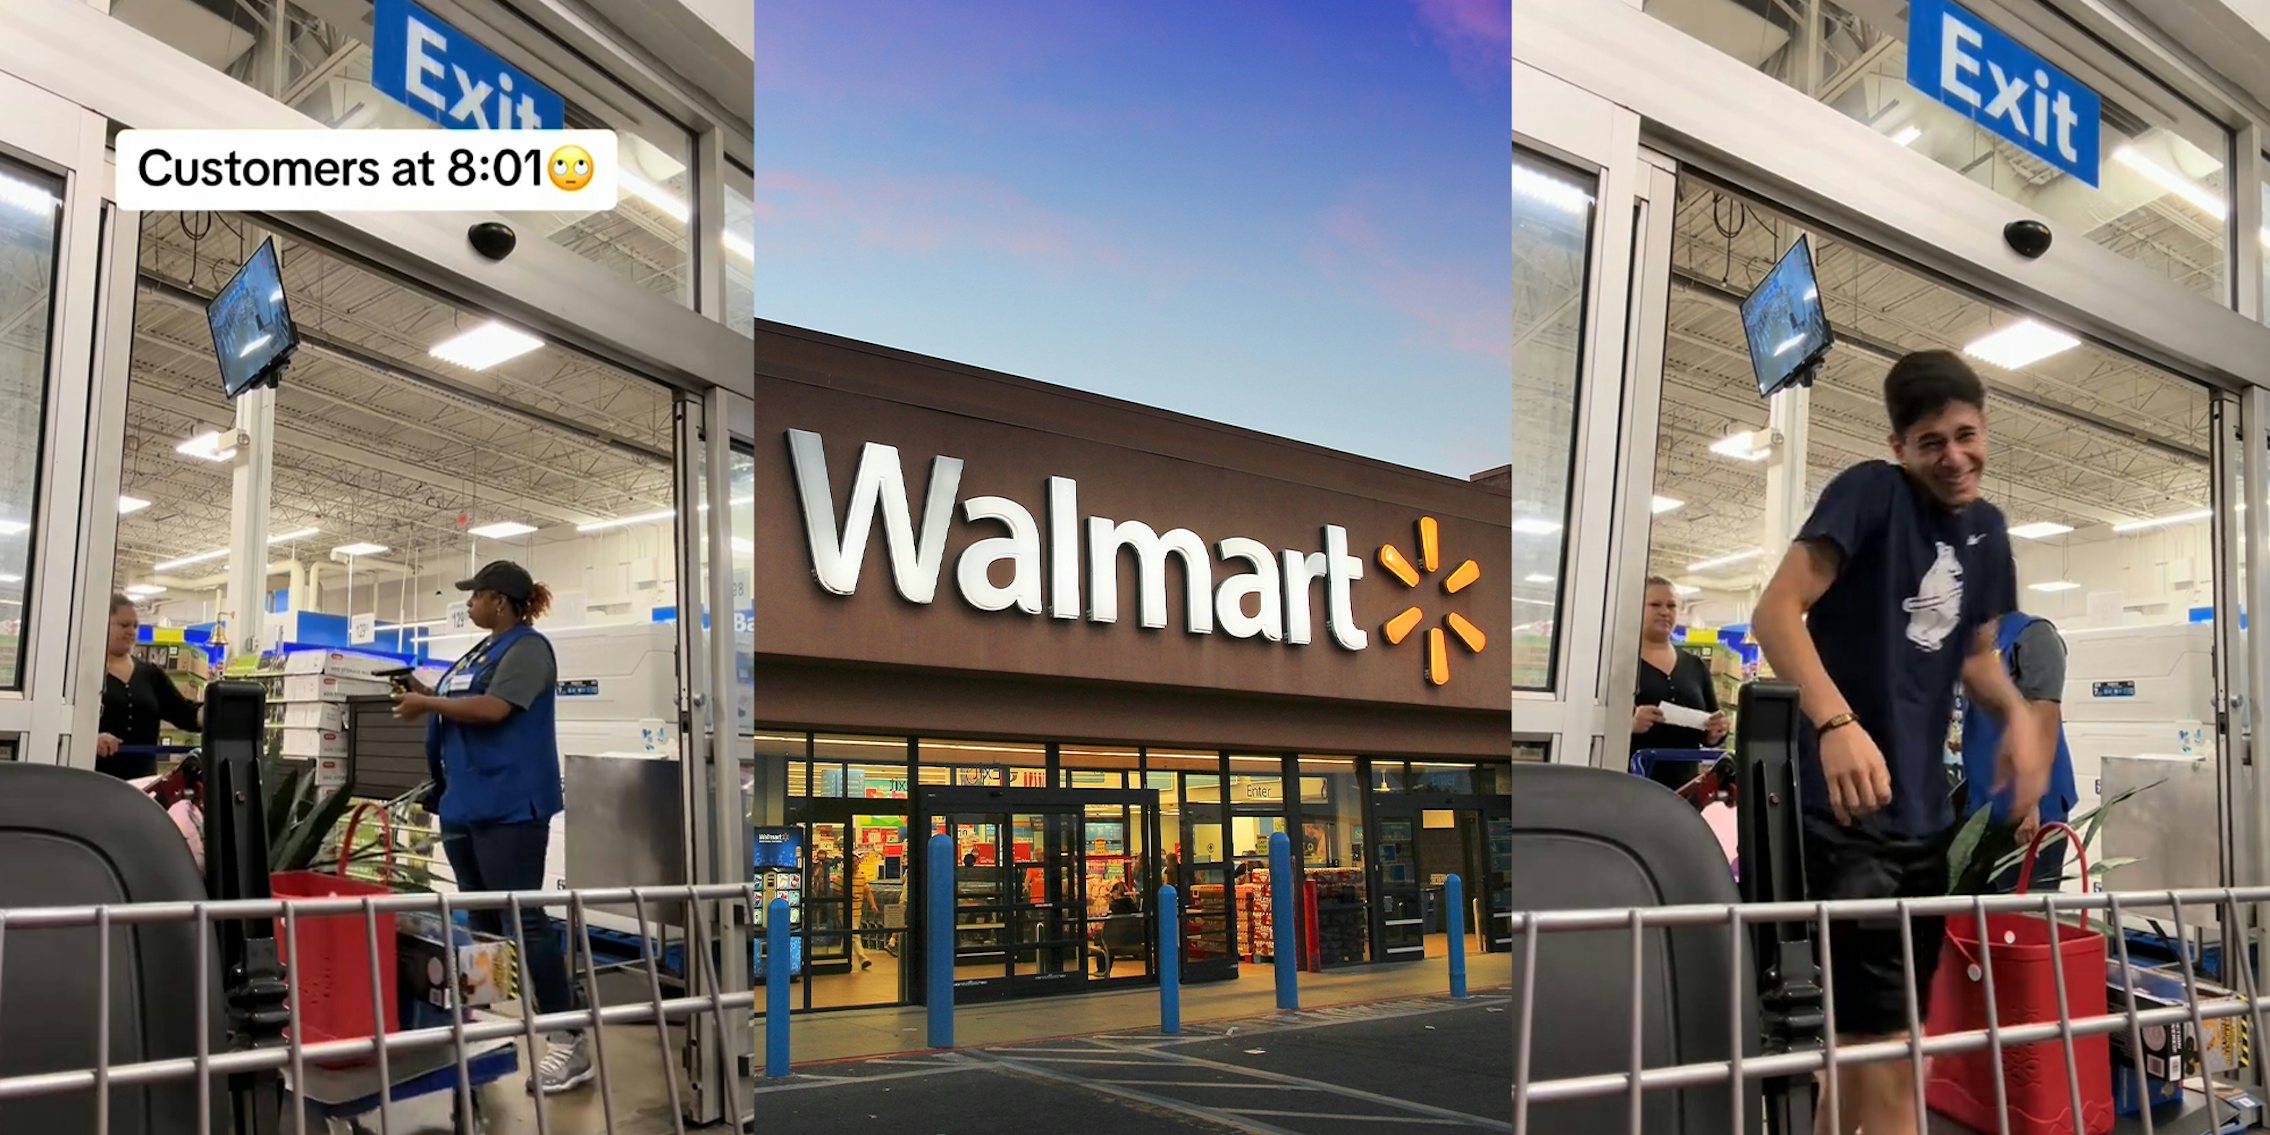 Walmart sending customer back out because of closing time